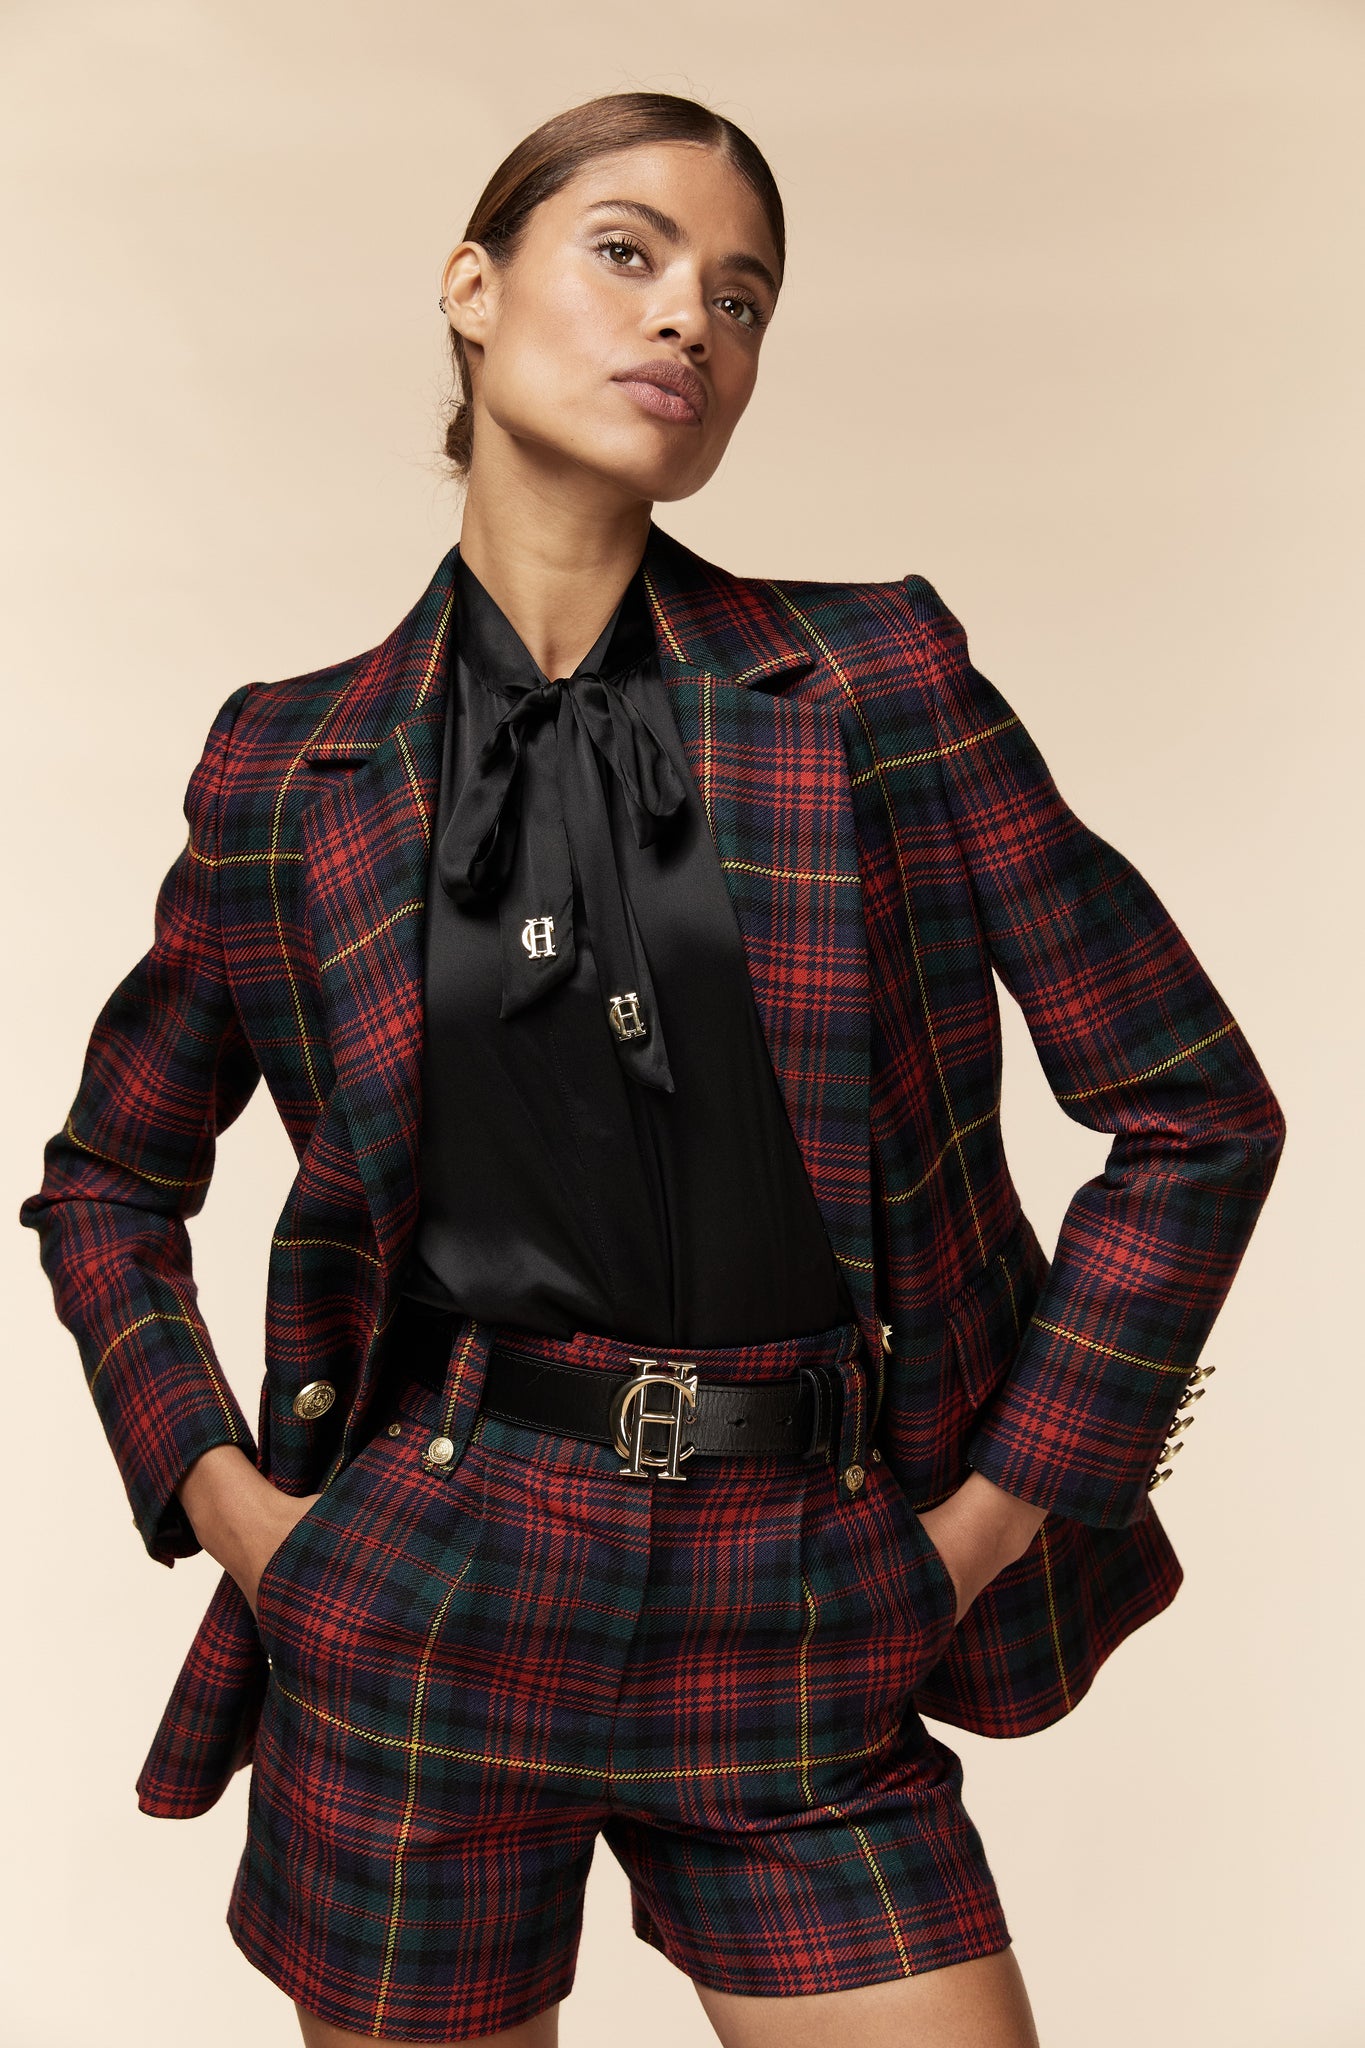 womens red green and blue tartan high rise tailored shorts with two single knife pleats and centre front zip fly fastening with twin branded gold stud buttons and side hip pockets with branded rivet detailing at top and bottom of pockets worn with matching double breasted blazer